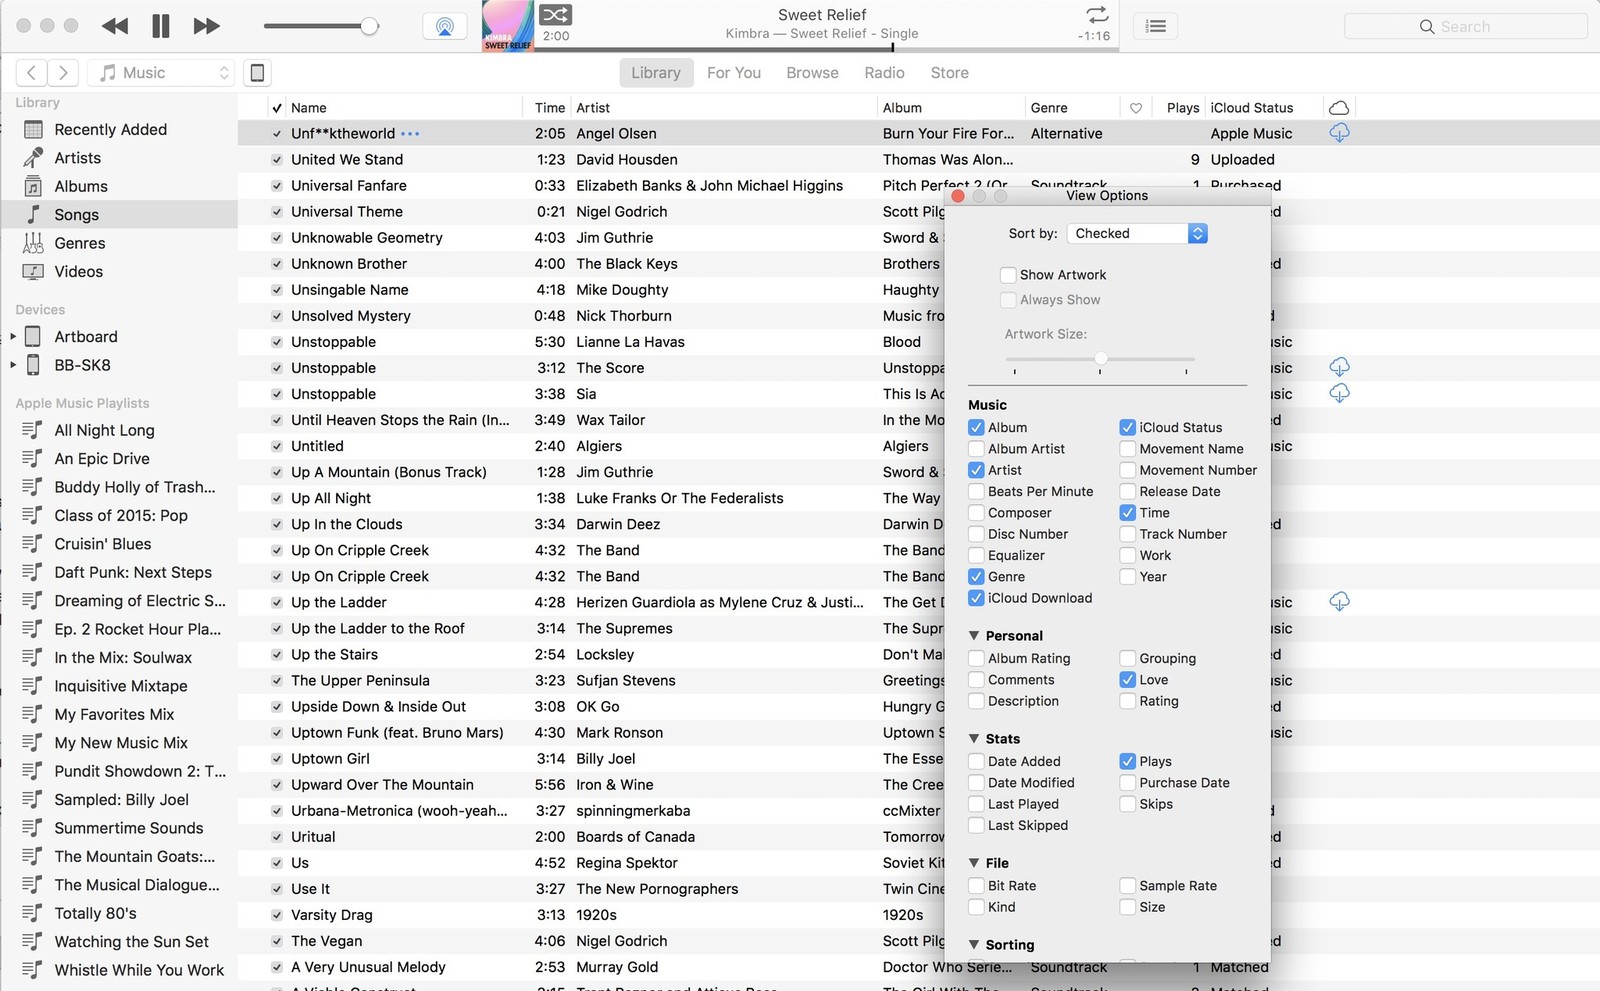 Download all songs from icloud to itunes